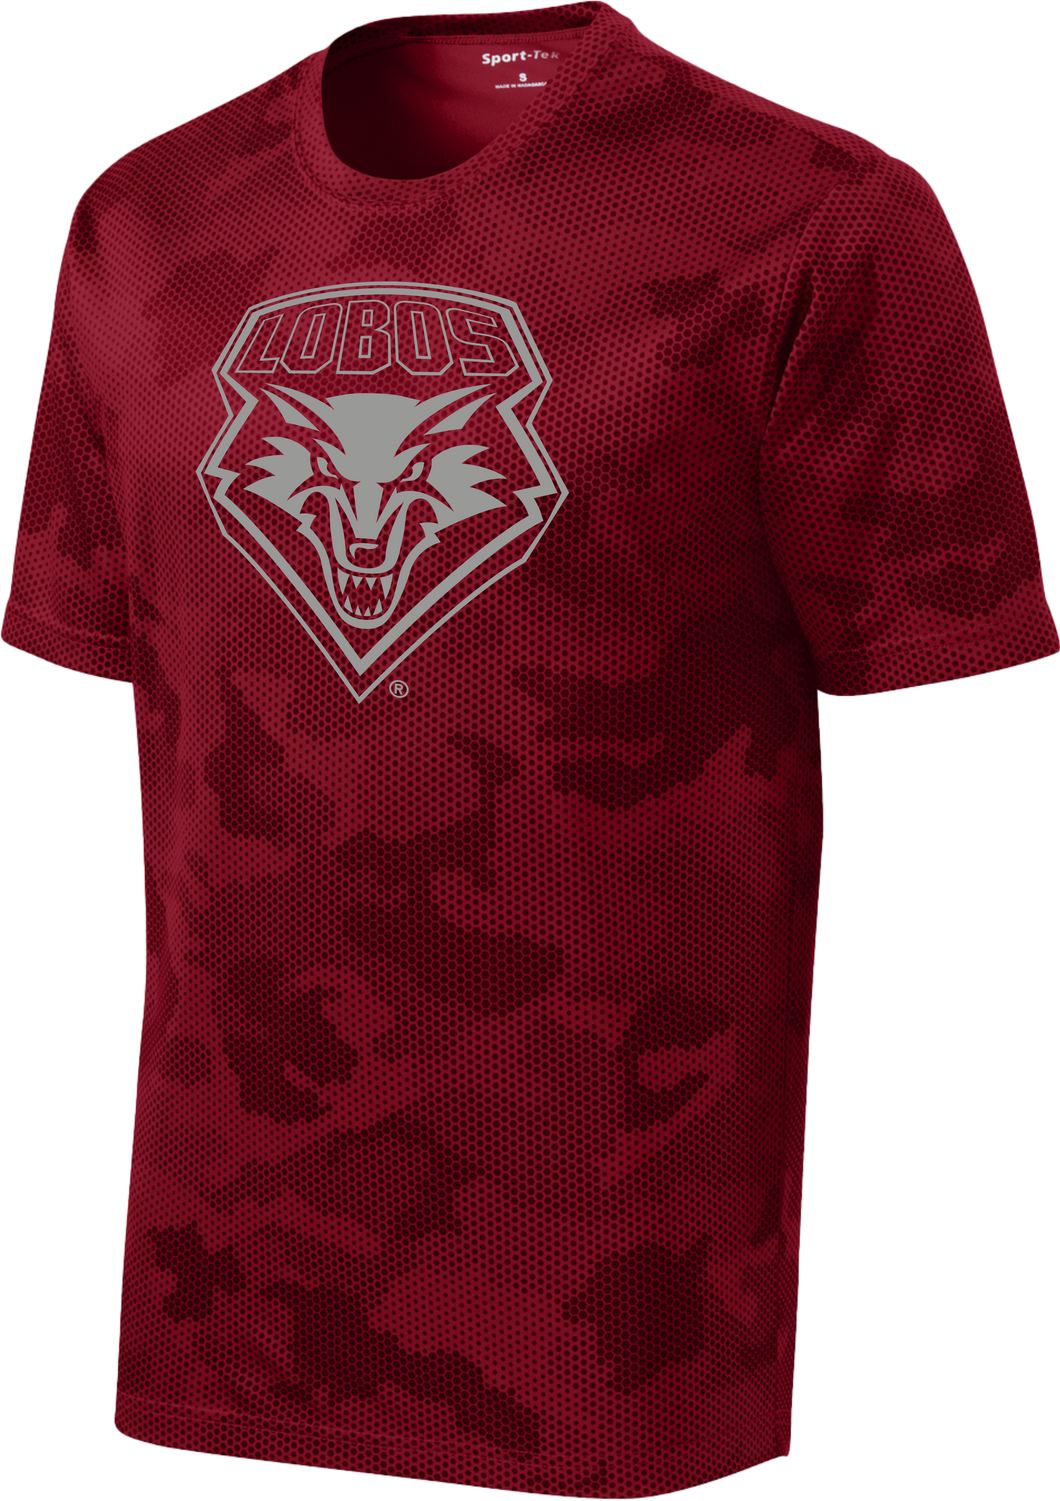 UNM Red Camohex Performance T-Shirt